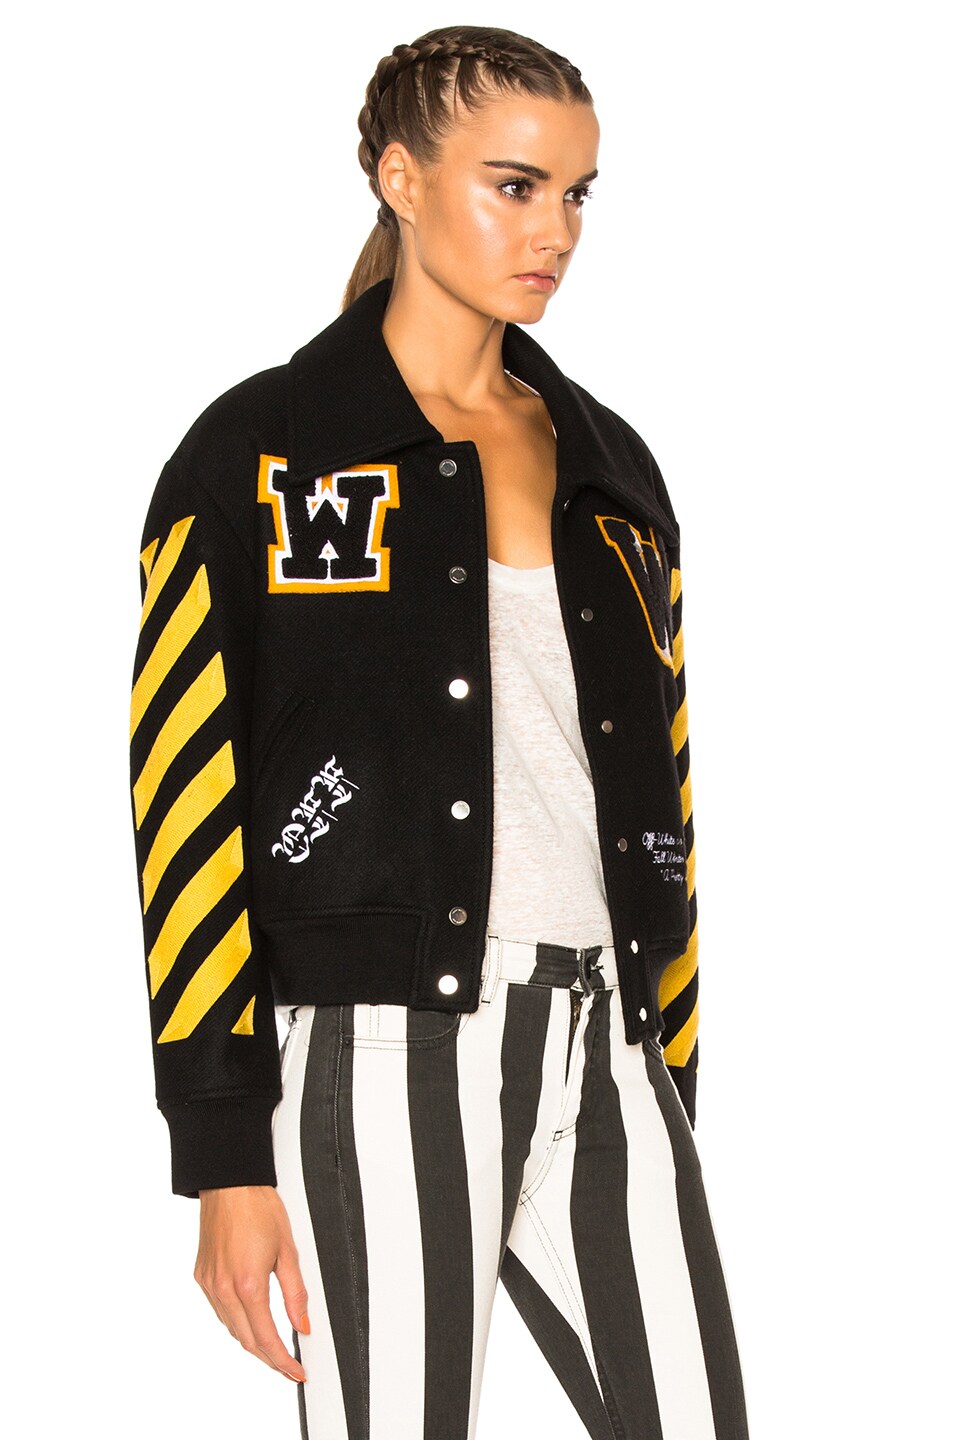 OFF-WHITE Varsity Bomber Jacket with Patches in Black & Yellow | FWRD